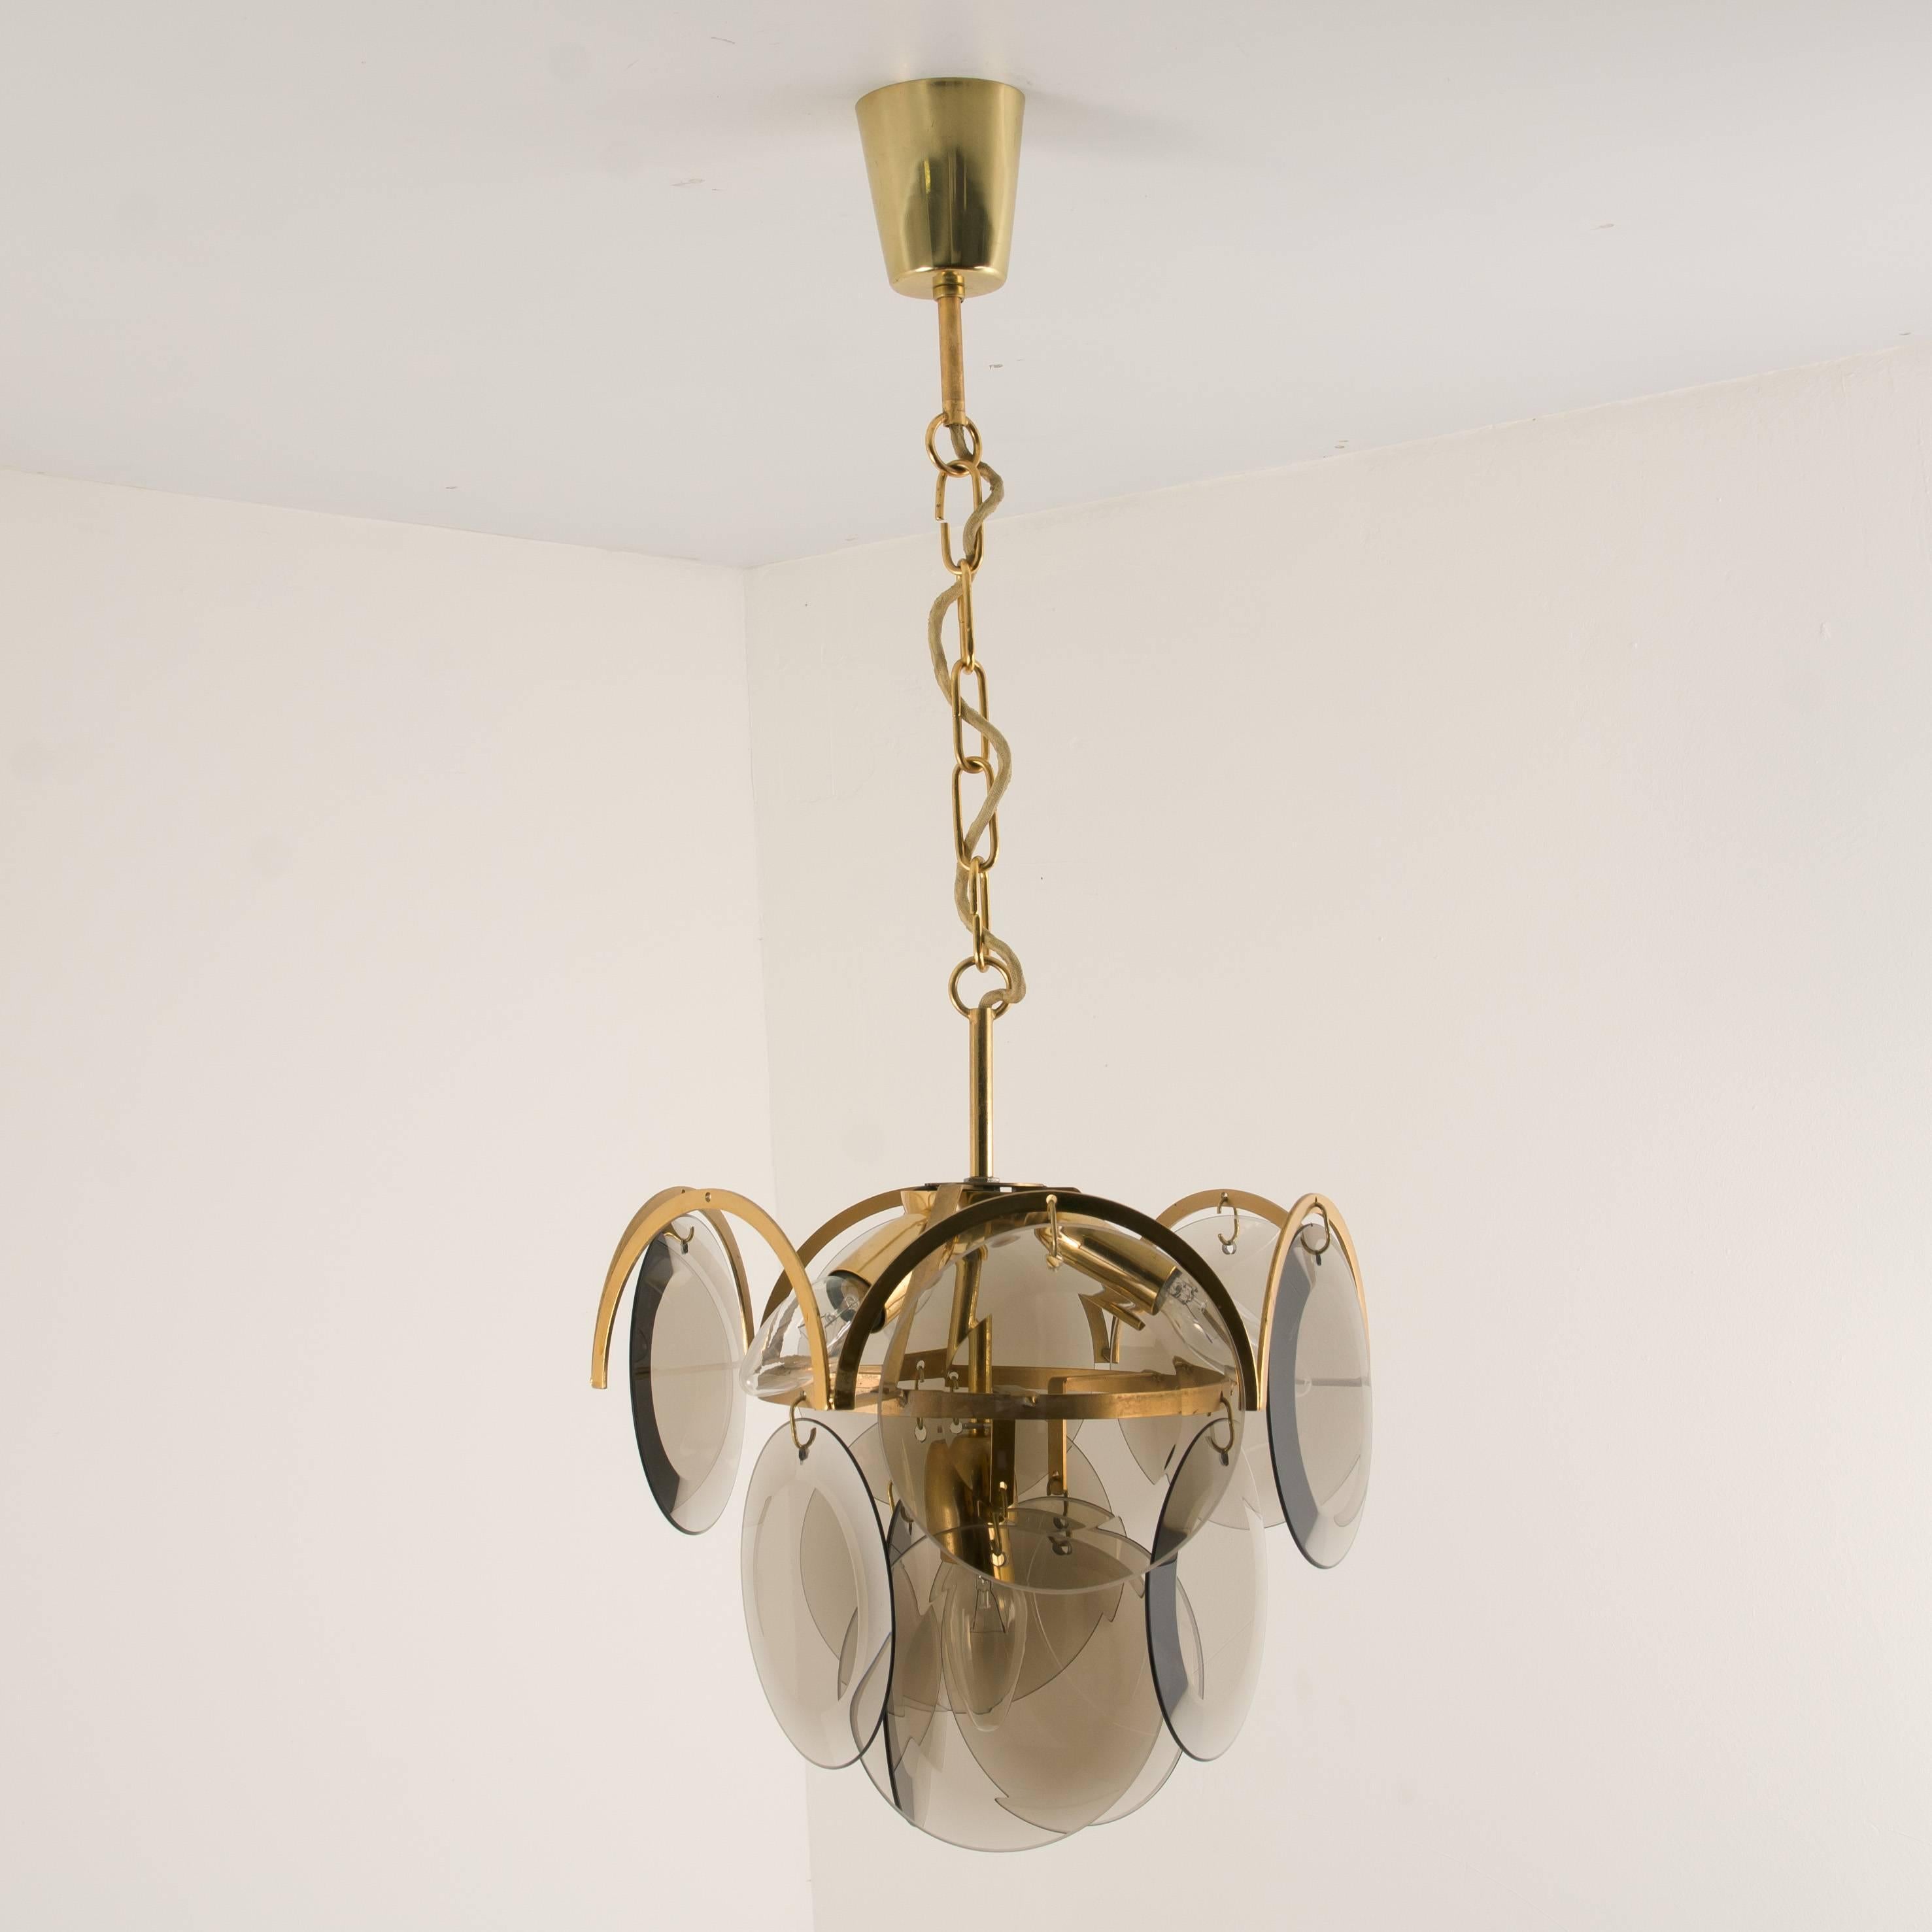 Set of Three Smoked Glass and Brass Chandeliers in the Style of Vistosi, Italy For Sale 6